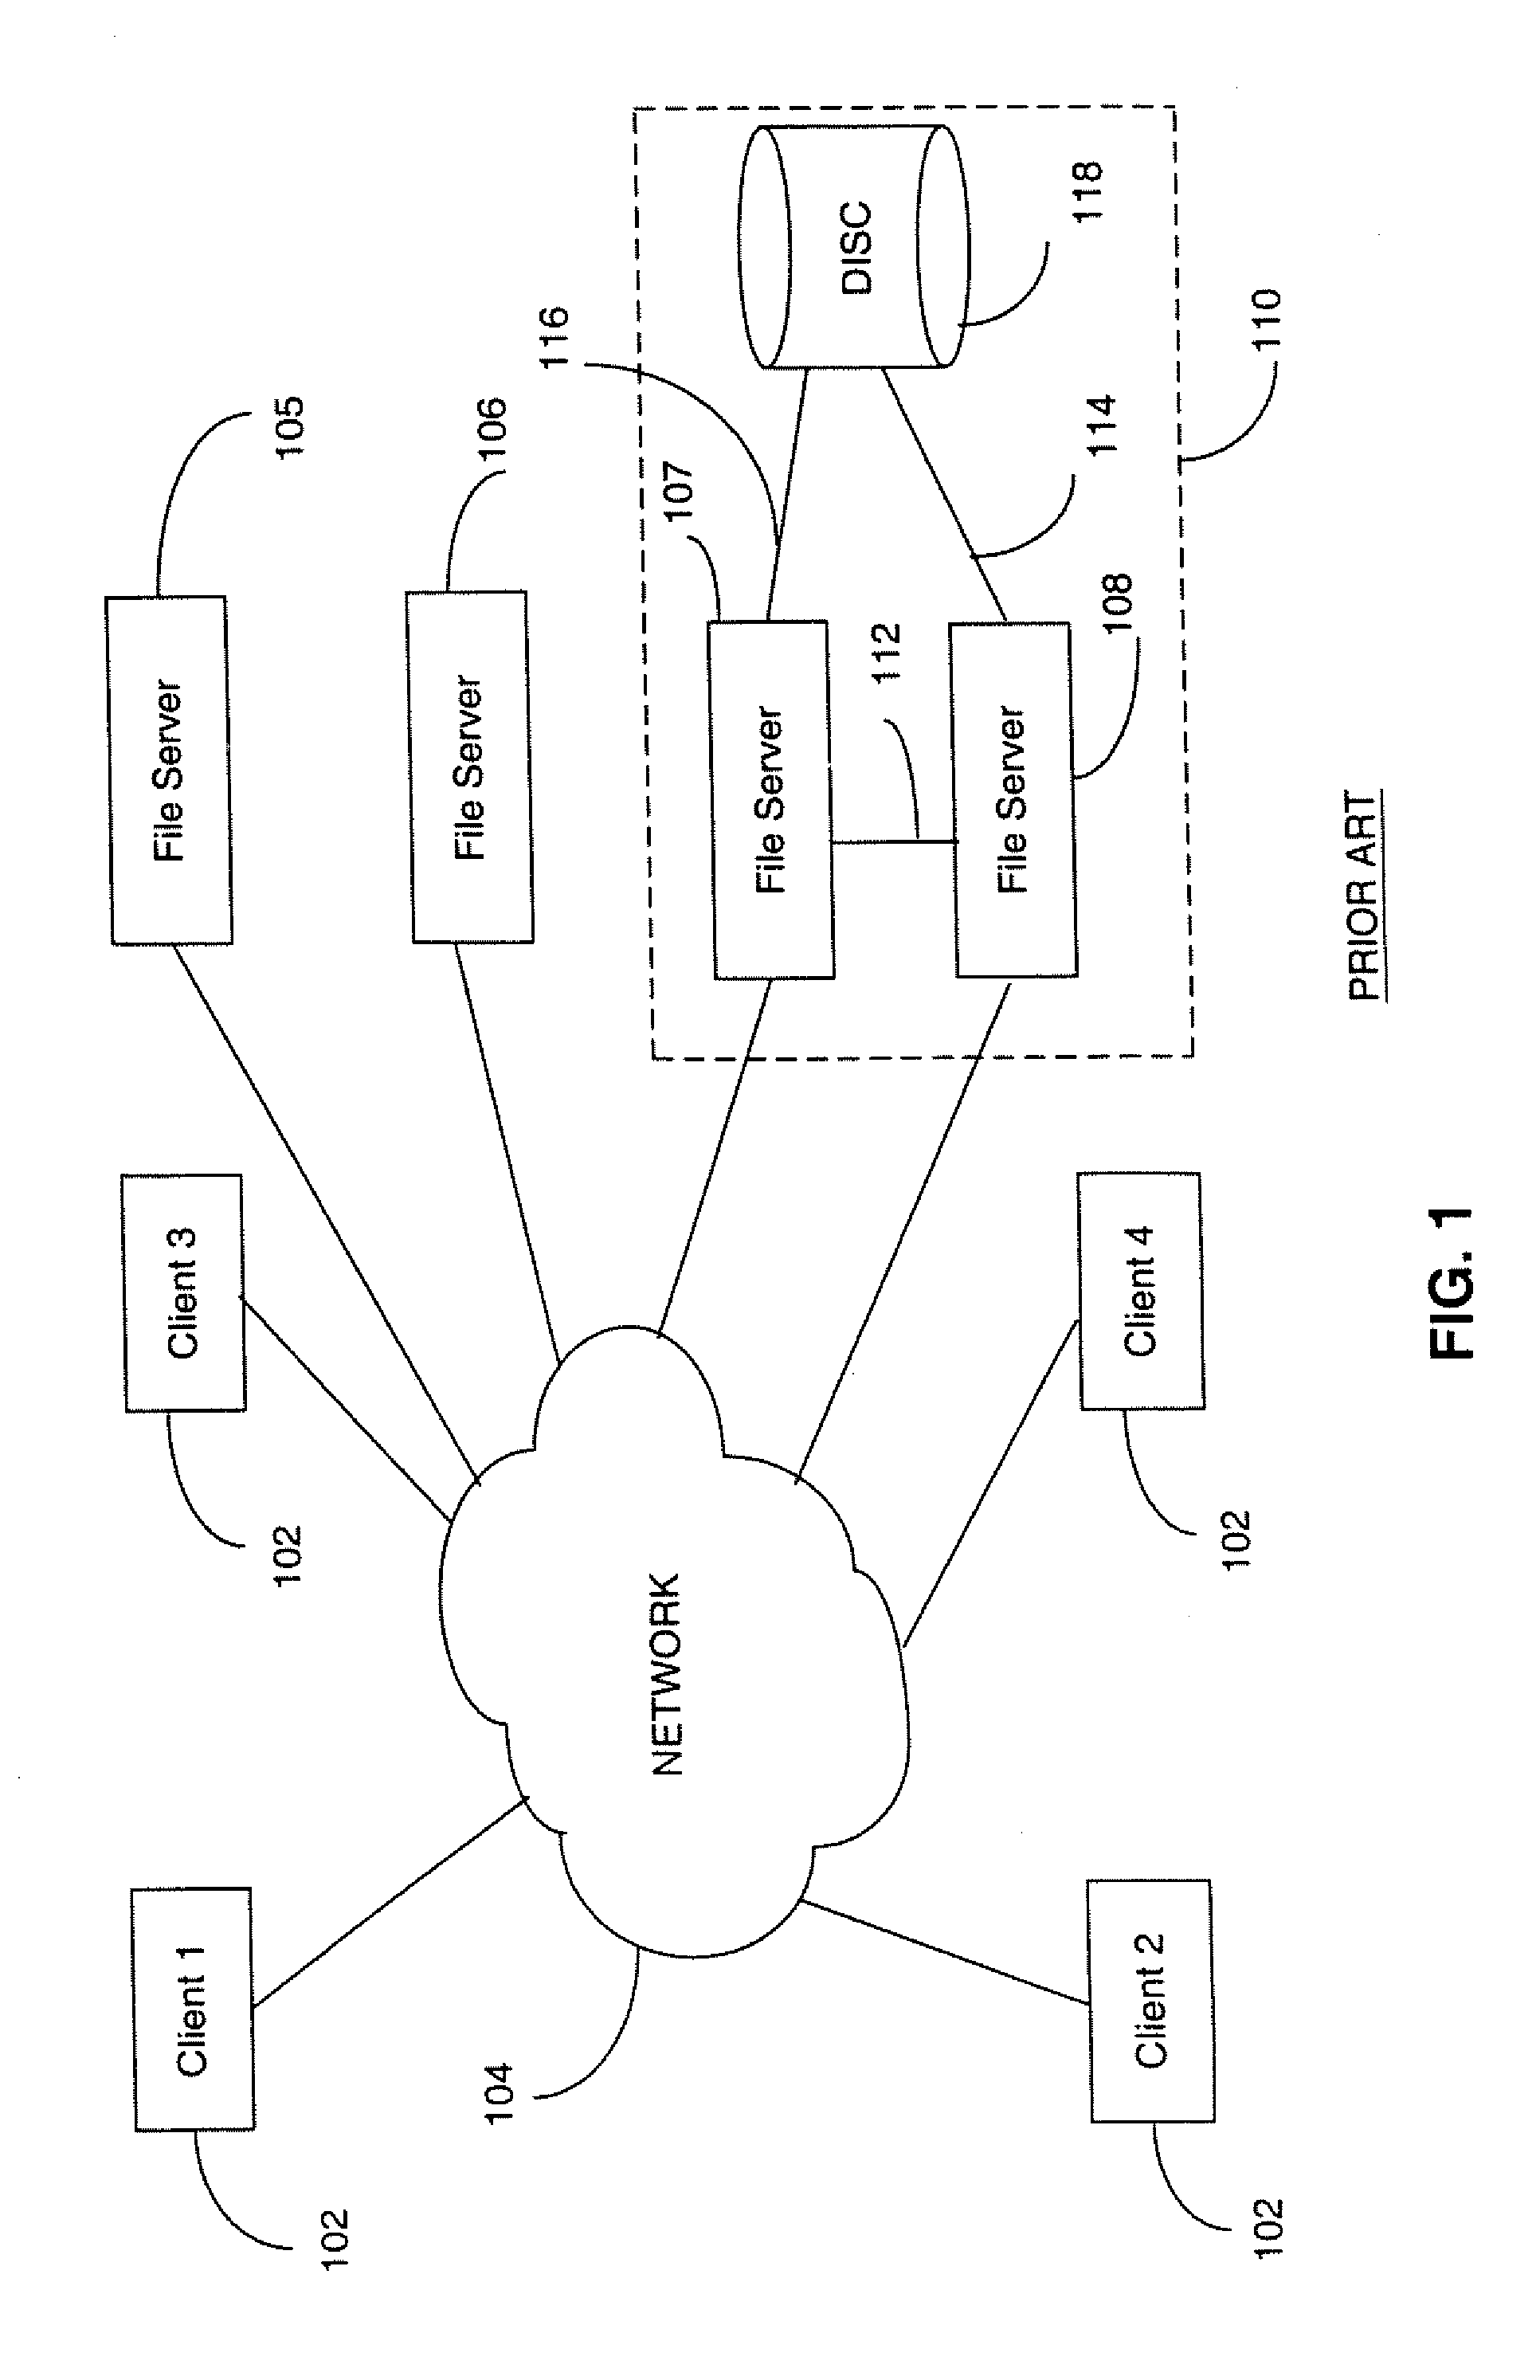 Rule based aggregation of files and transactions in a switched file system